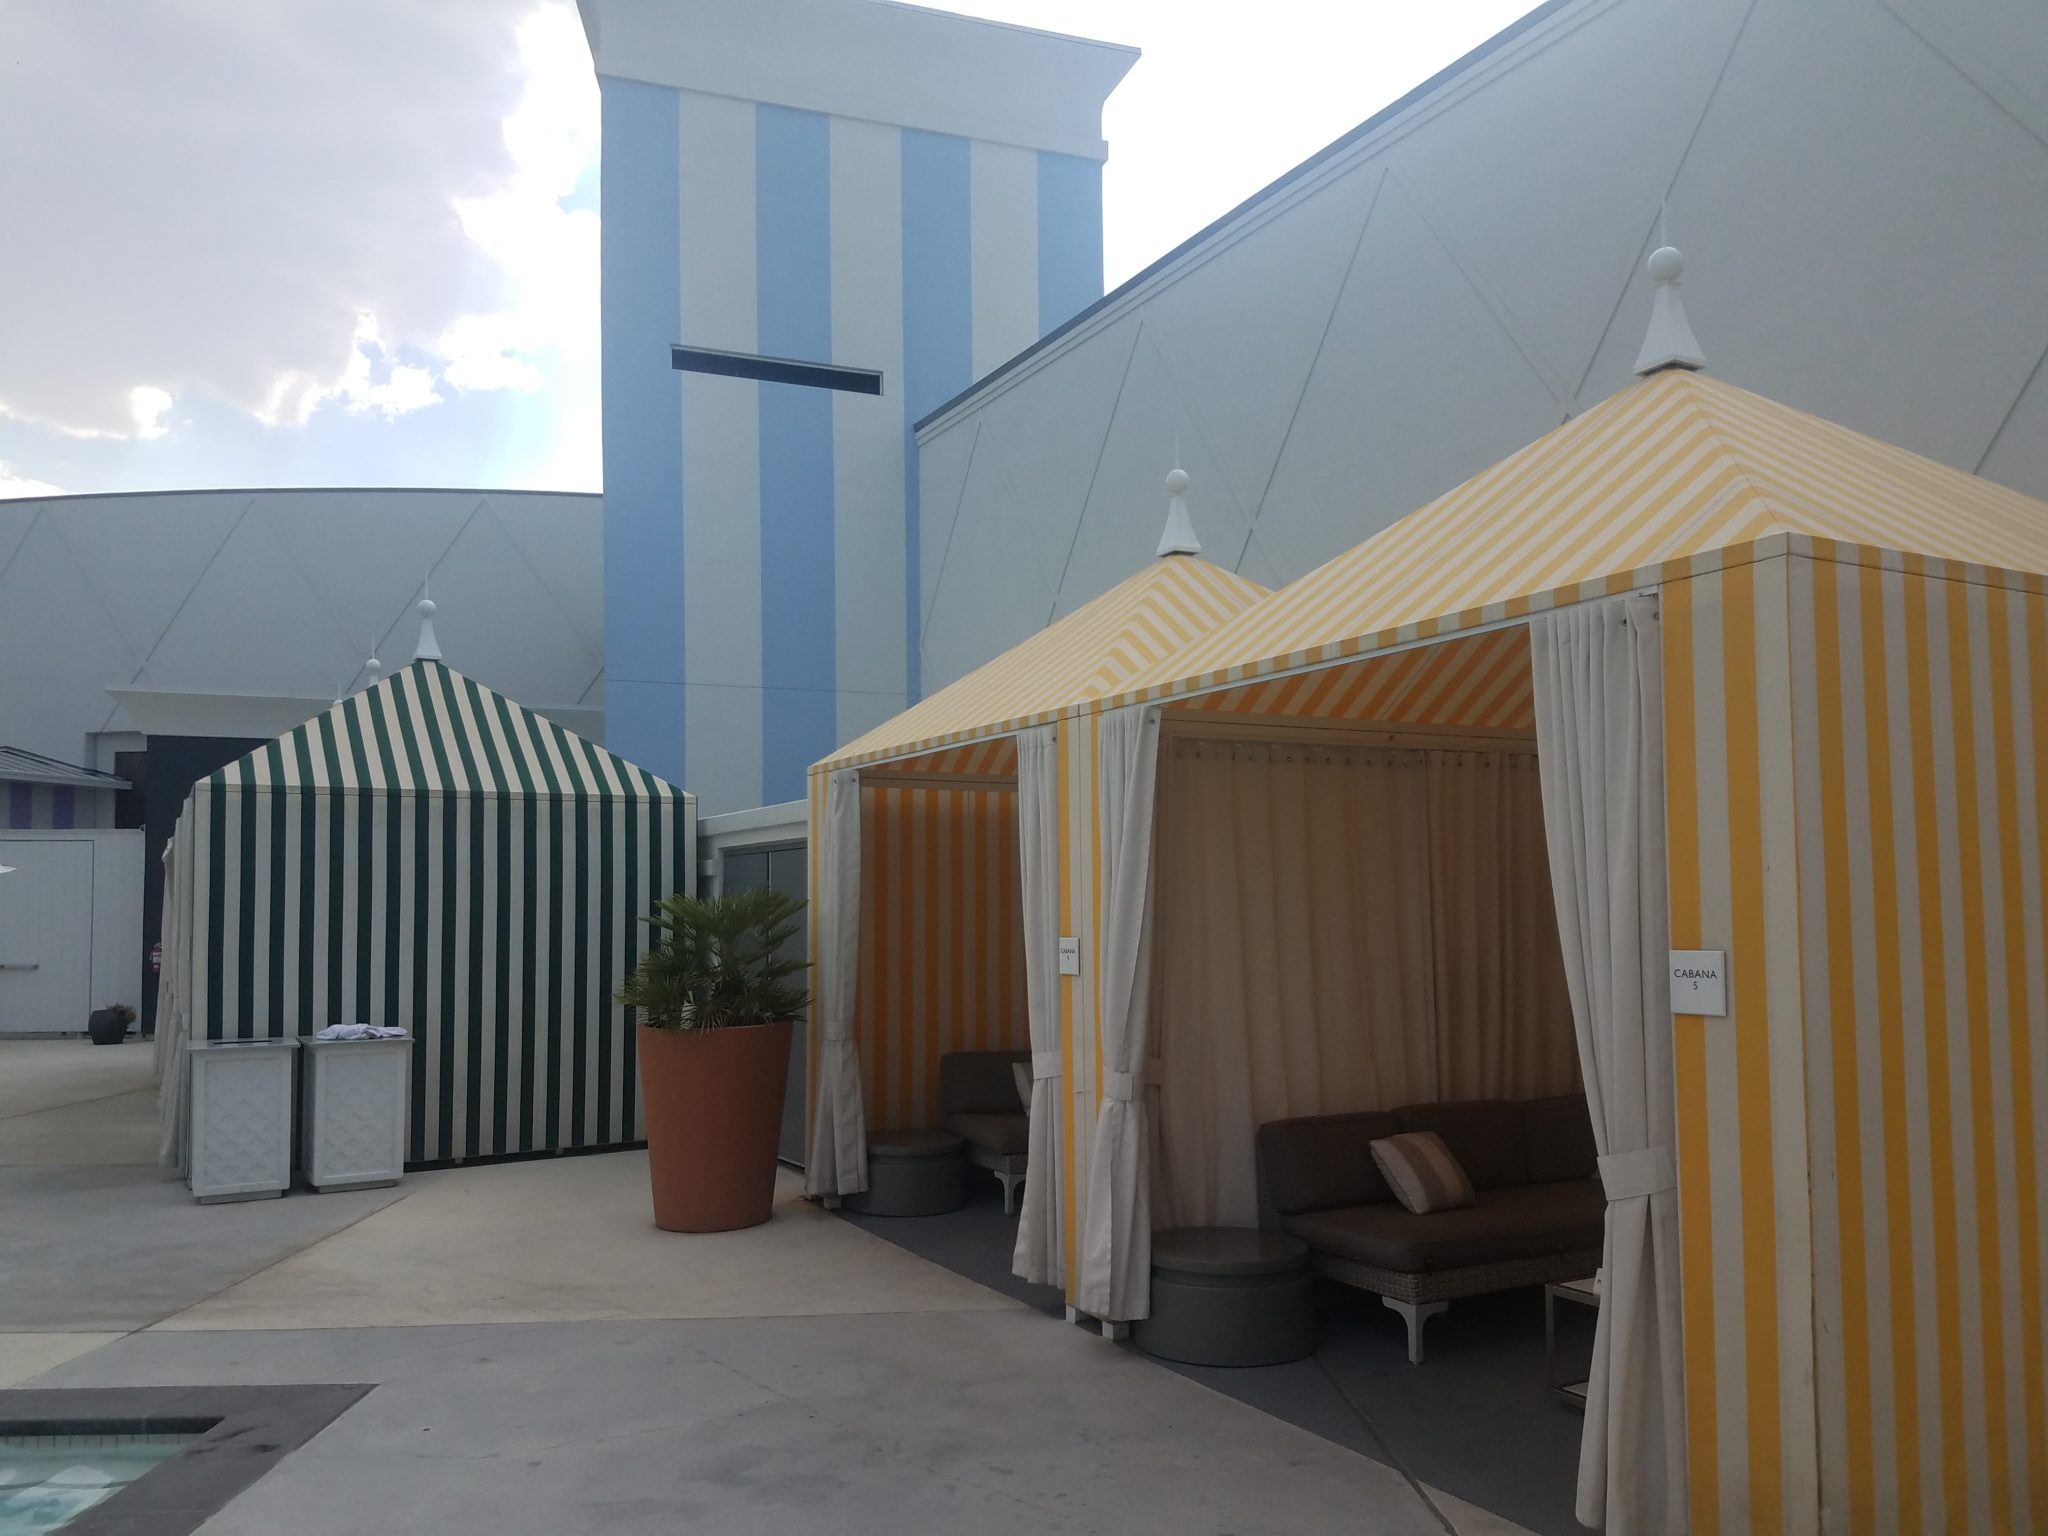 a group of striped tents in a courtyard